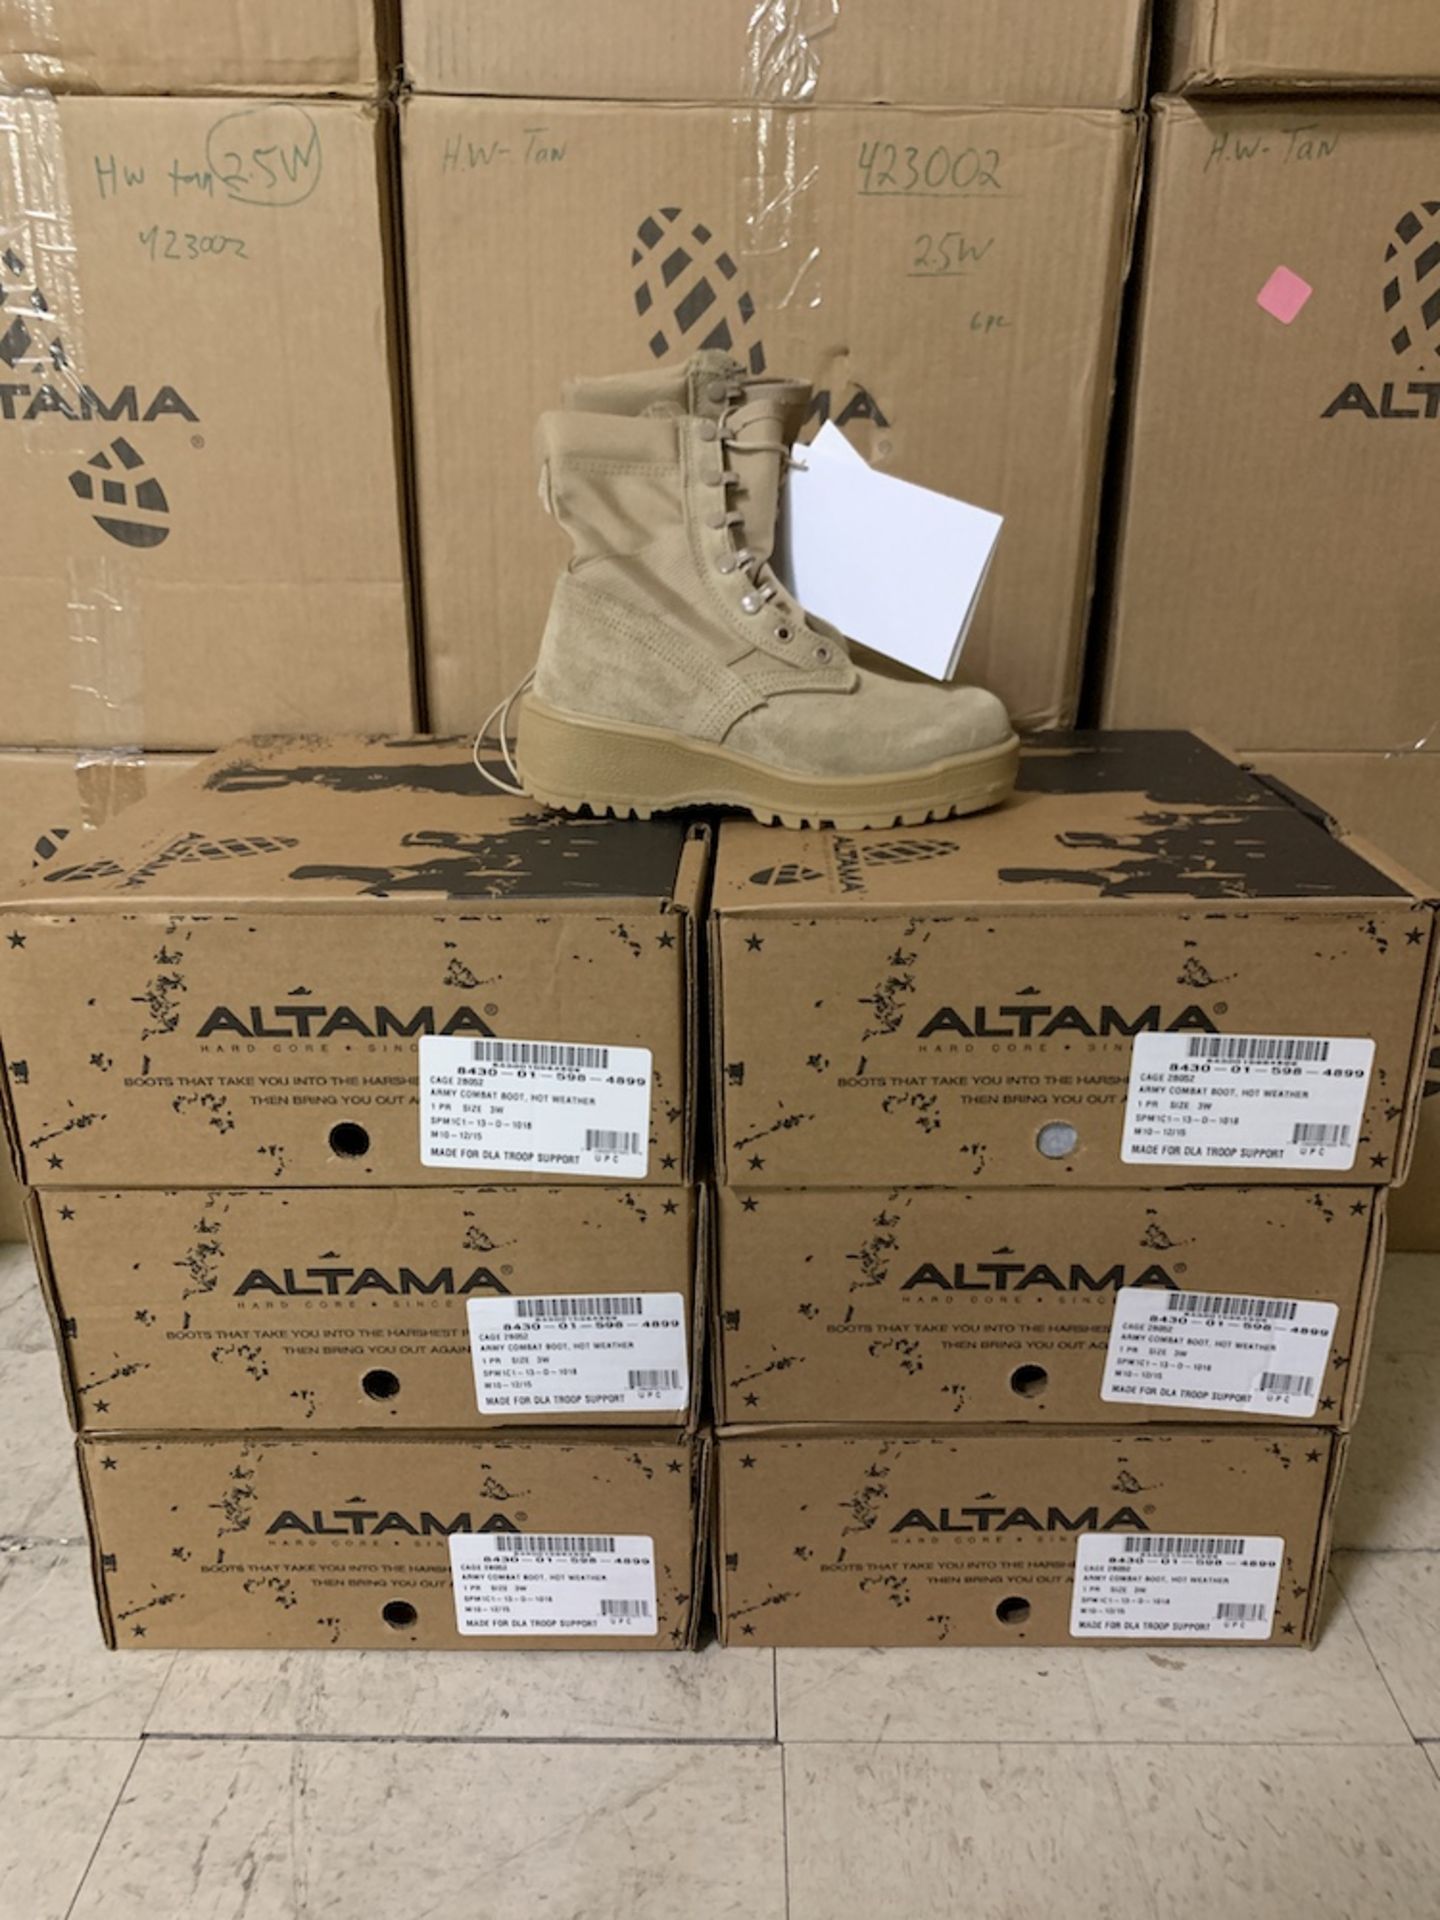 1 Pallet of Altama Army Combat Tan Boots 2B052, 63 Pairs, New in Box, $6,300 Retail. Various Sizes - Image 3 of 4